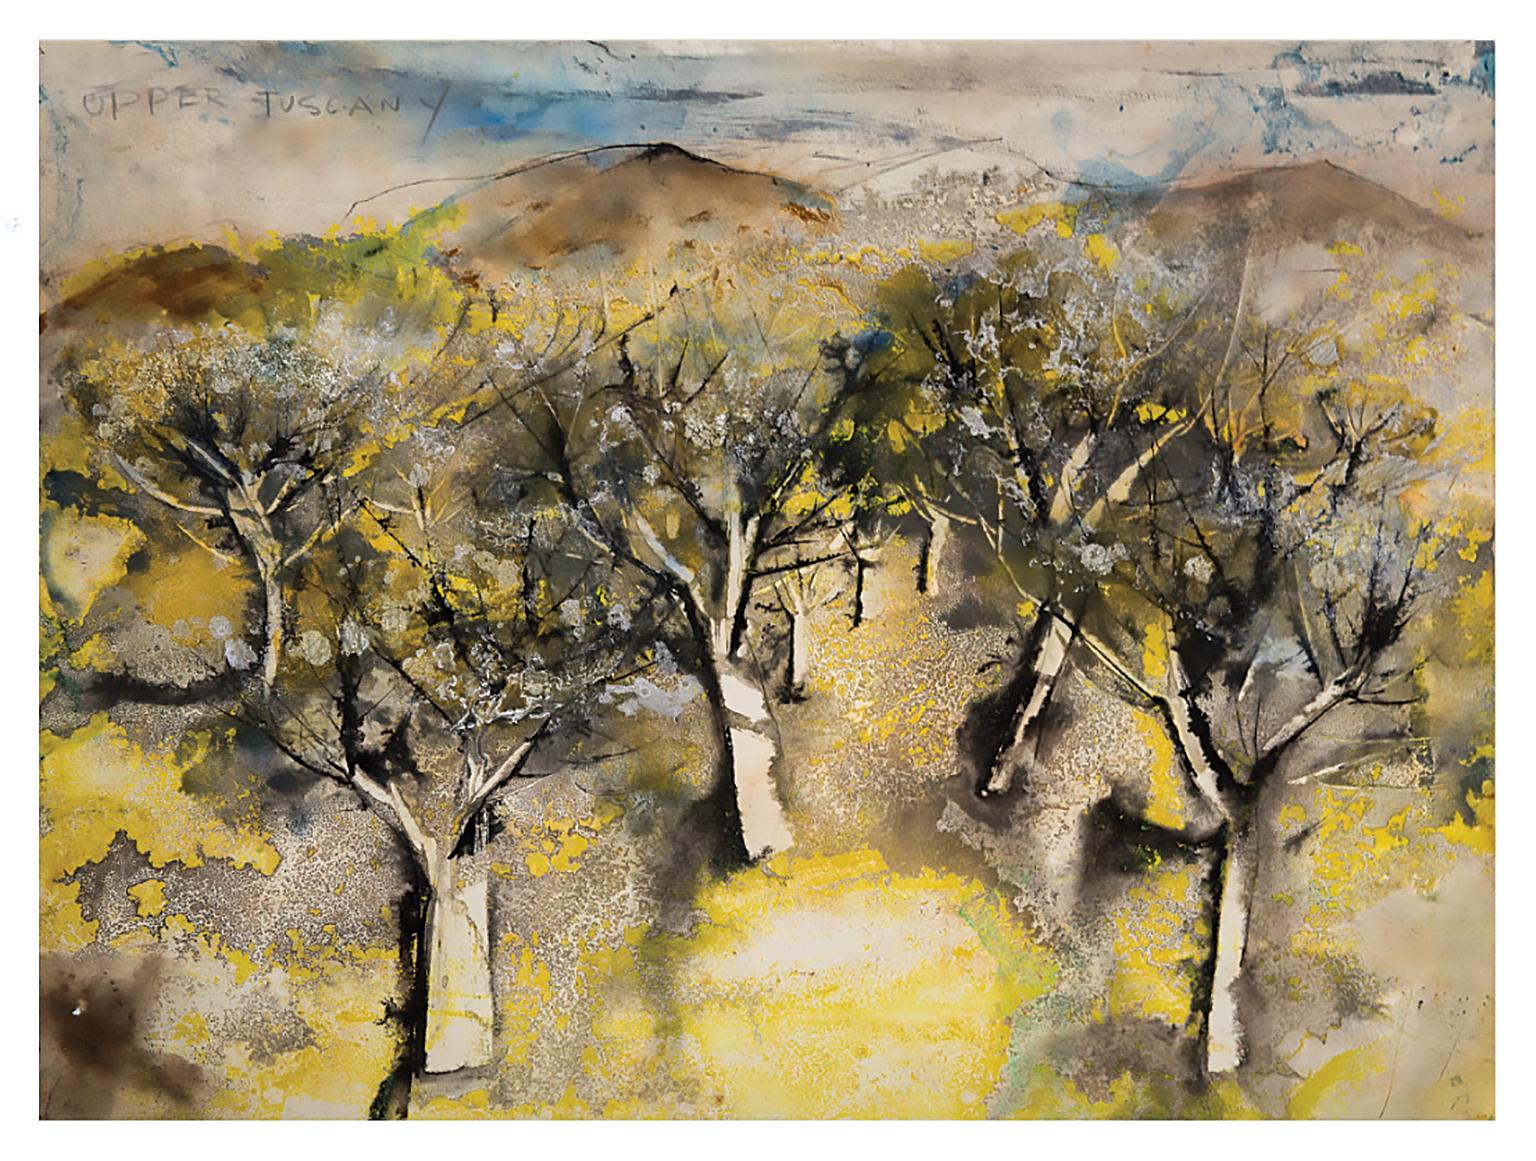 Upper Tuscany — Mid-century expressionism - Art by William Thon